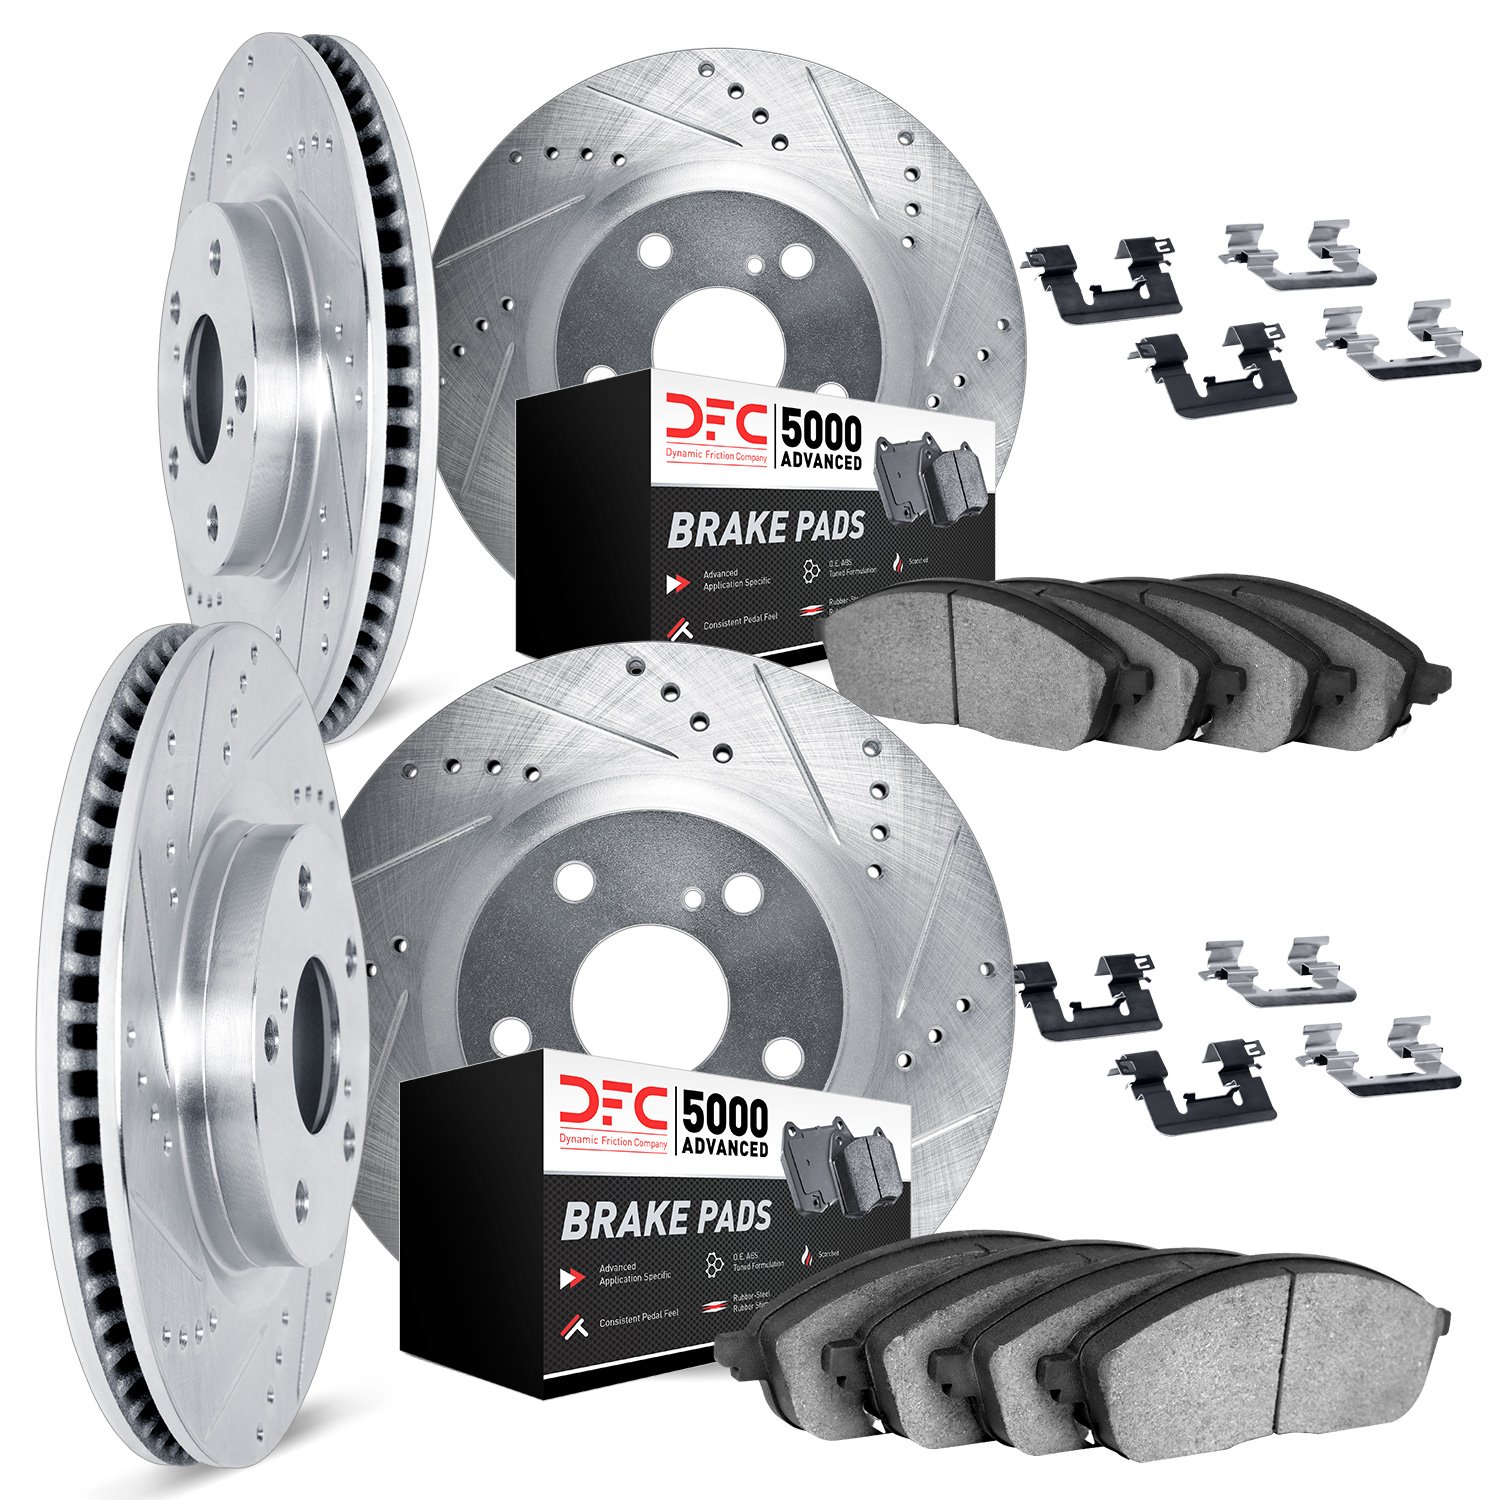 7514-31056 Drilled/Slotted Brake Rotors w/5000 Advanced Brake Pads Kit & Hardware [Silver], 2007-2014 BMW, Position: Front and R